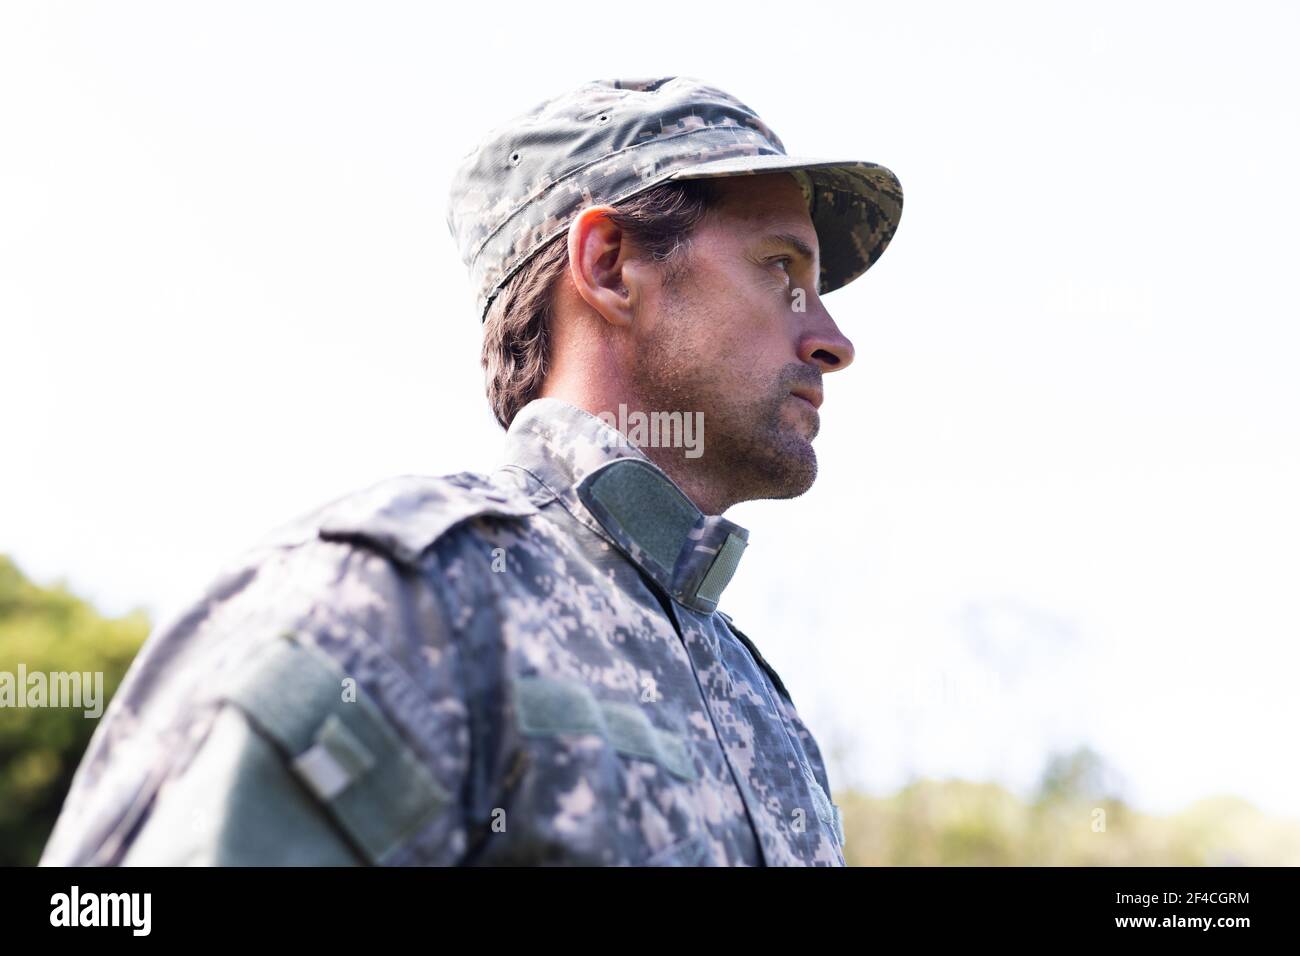 Caucasian male soldier wearing camo fatigues and cap standing outdoors looking away Stock Photo